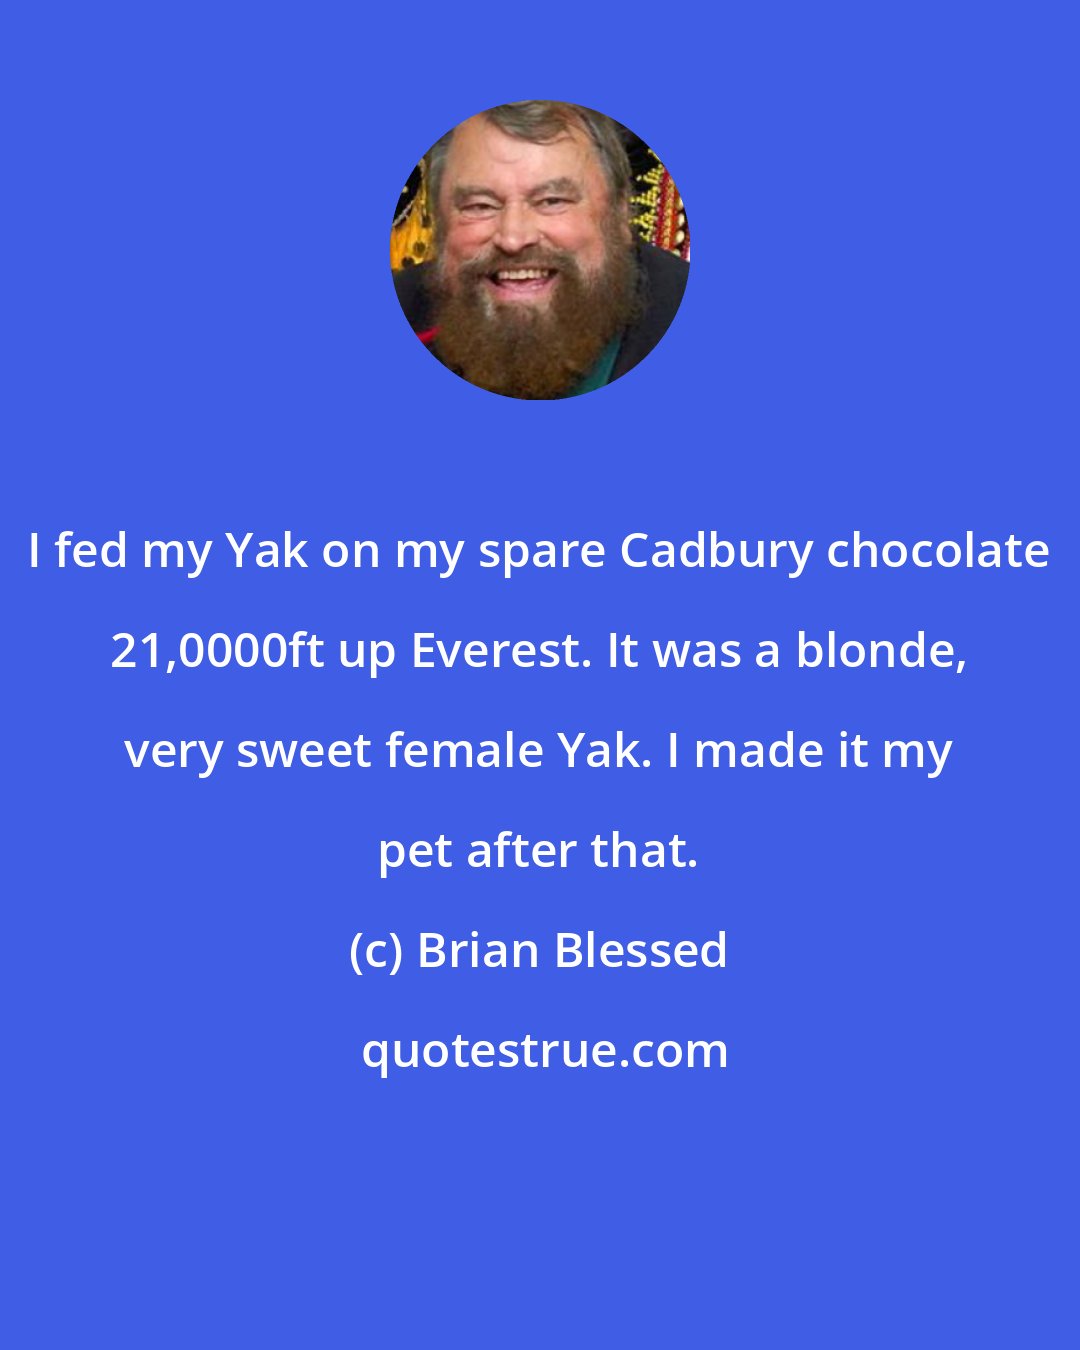 Brian Blessed: I fed my Yak on my spare Cadbury chocolate 21,0000ft up Everest. It was a blonde, very sweet female Yak. I made it my pet after that.